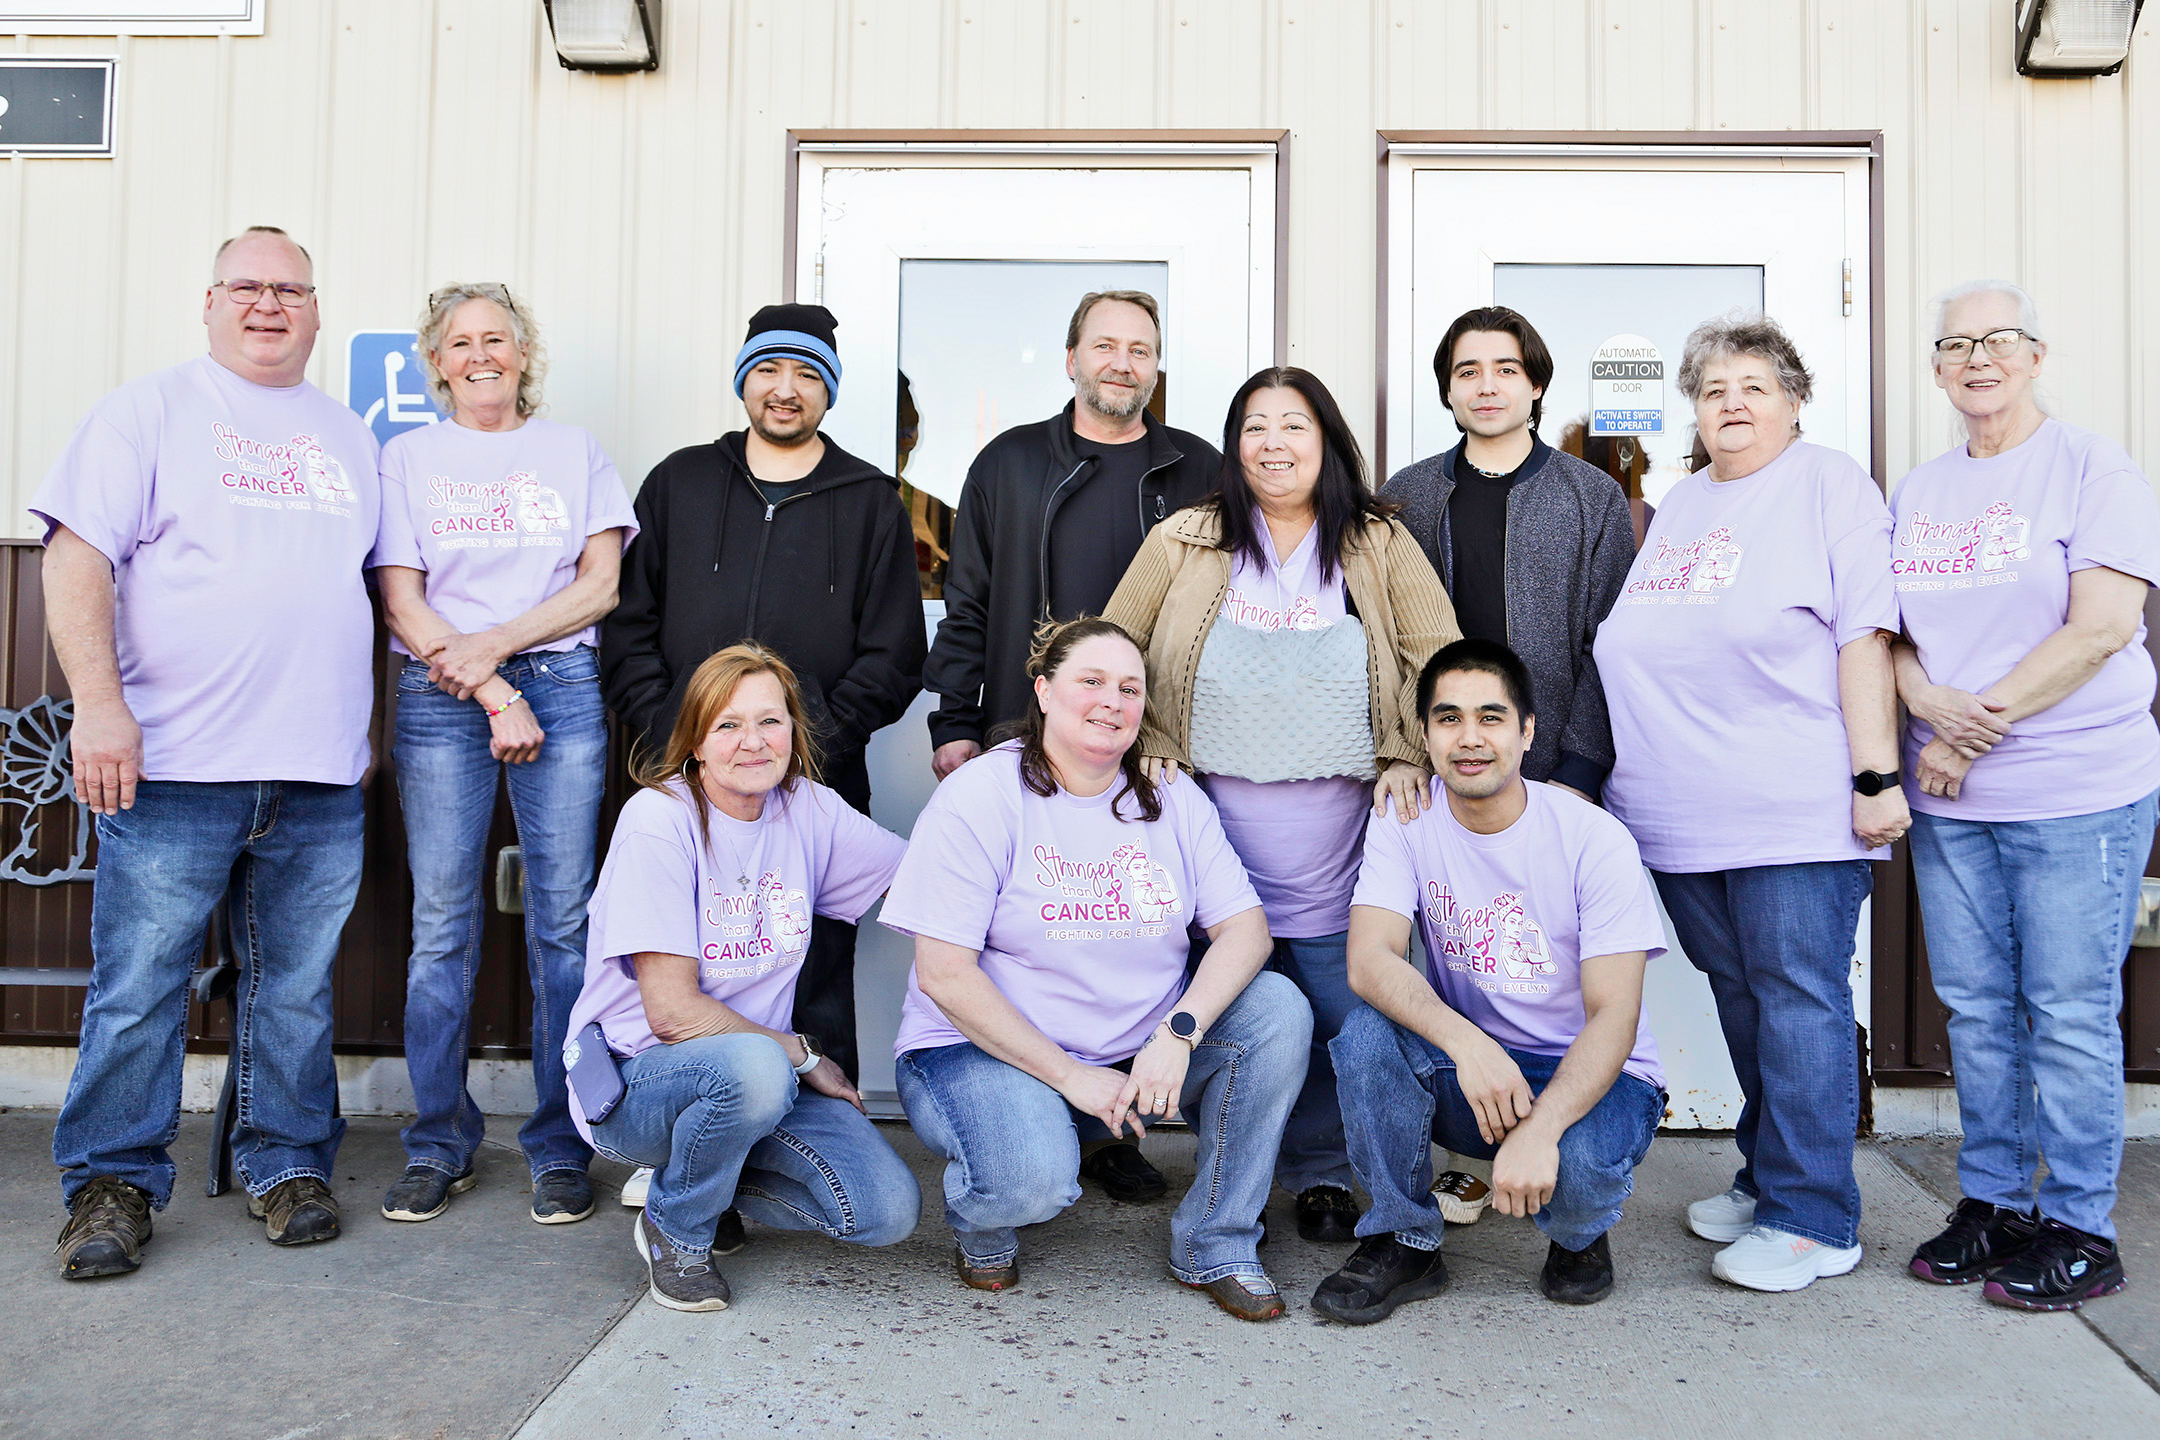 Humm-Dinger employees are shown with their teammate Evelyn Moralez at the “Stronger Than Cancer” Benefit they organized to help her navigate medical expenses as she battles breast cancer. Back row, left to right: Humm-Dinger owner Jason Zacher, Humm-Dinger employee Karin Anderberg, Ronaldo Moralez, Jeremy Stuber, Evelyn Moralez, Ethan Moralez, Humm-Dinger employees Gerri Bader and Dottie Poncelet. Front row, left to right: Tina West, Ellen Tobin, Kevin Phanthavong.